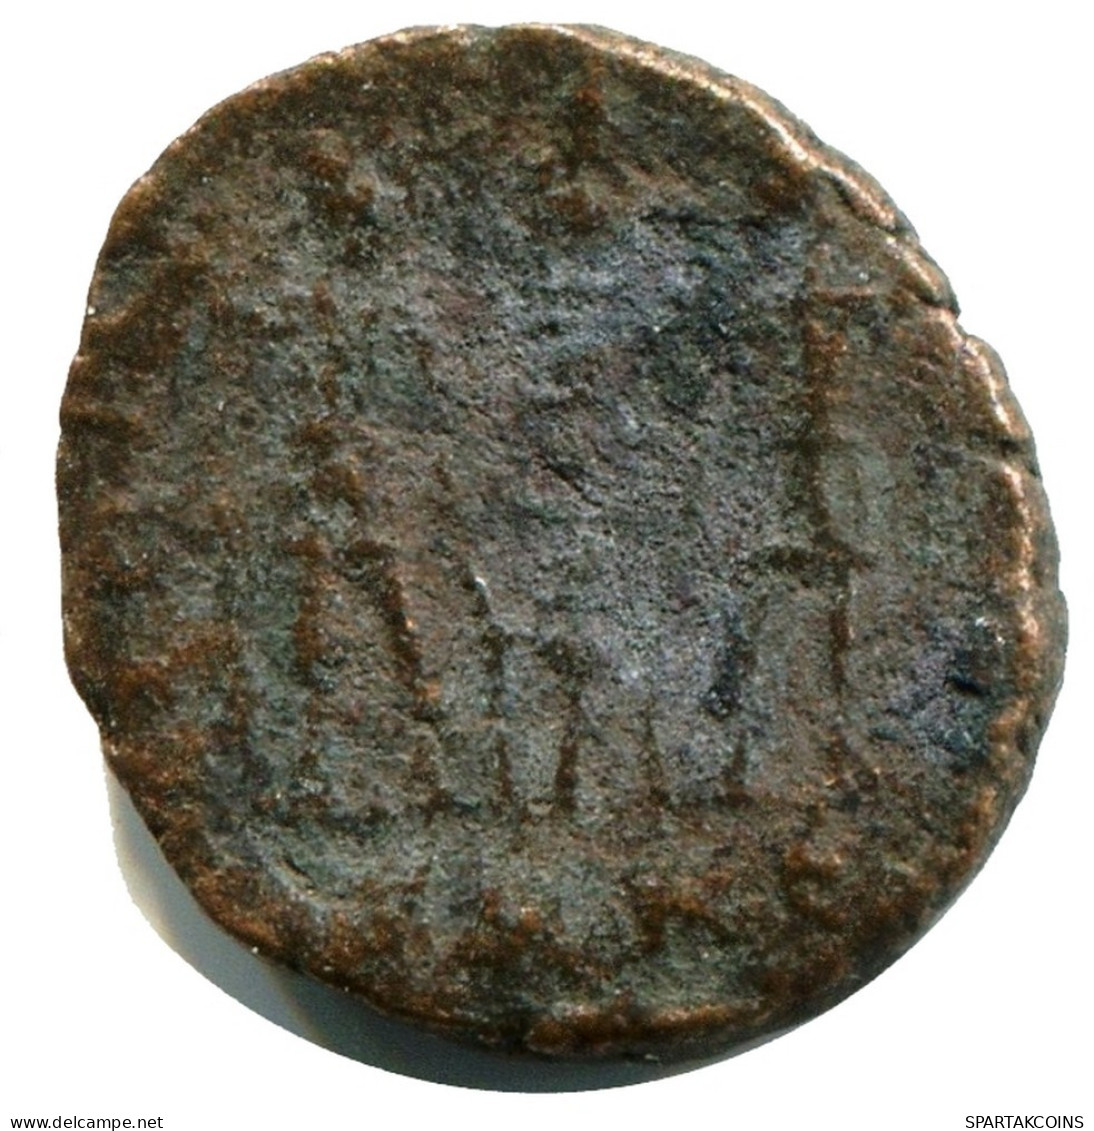 ROMAN Coin MINTED IN ANTIOCH FOUND IN IHNASYAH HOARD EGYPT #ANC11276.14.U.A - The Christian Empire (307 AD To 363 AD)